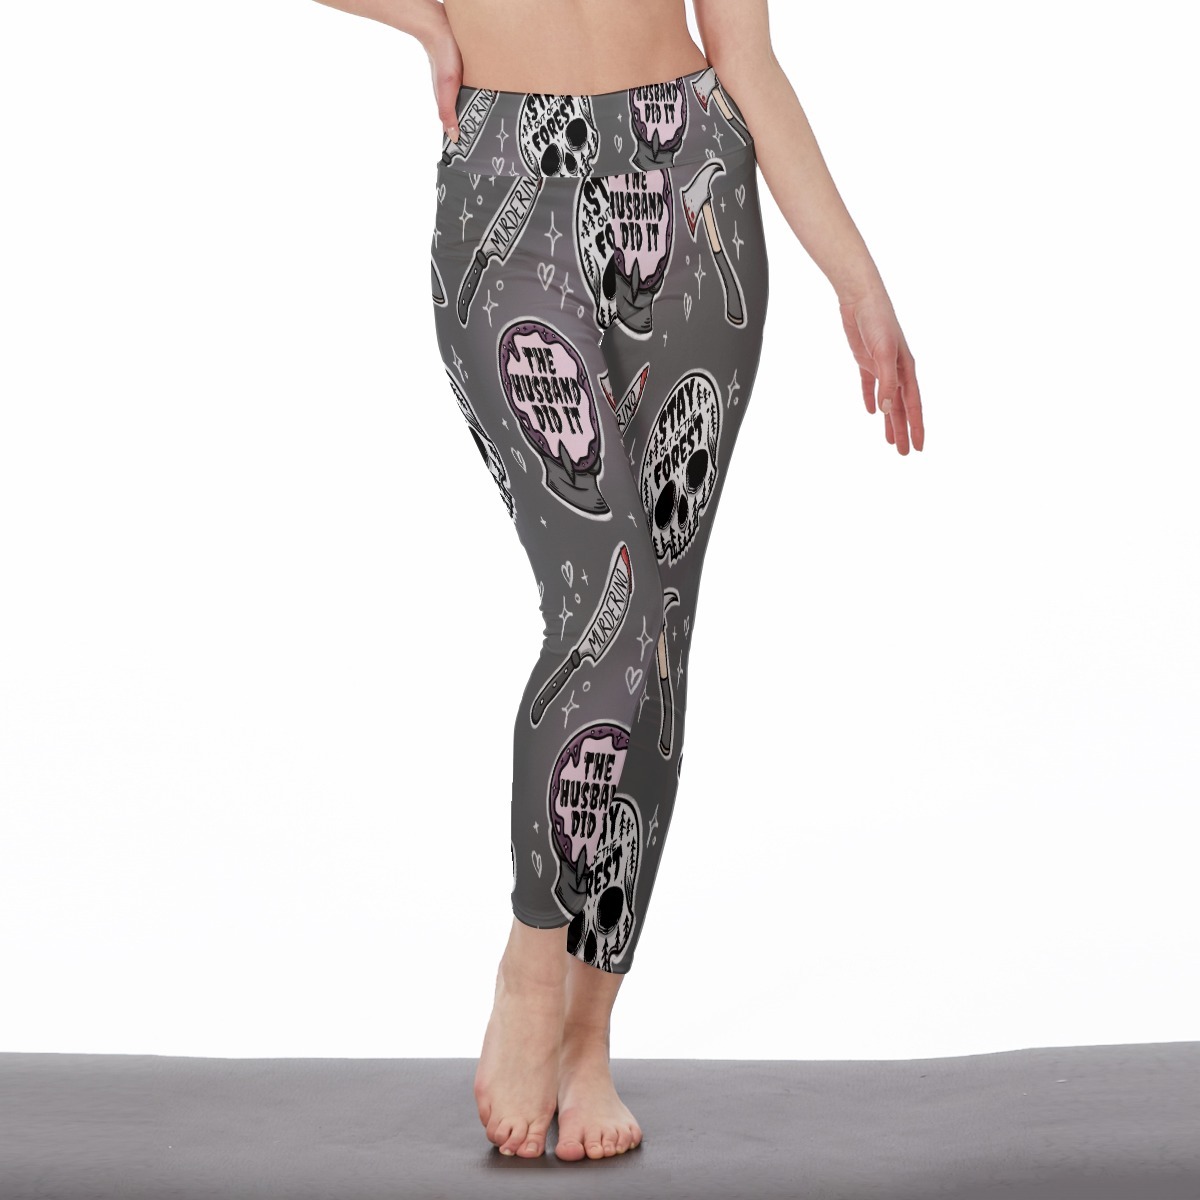 Primary image for Women's Leggings Gray Criminals Series Size S-5XL Available